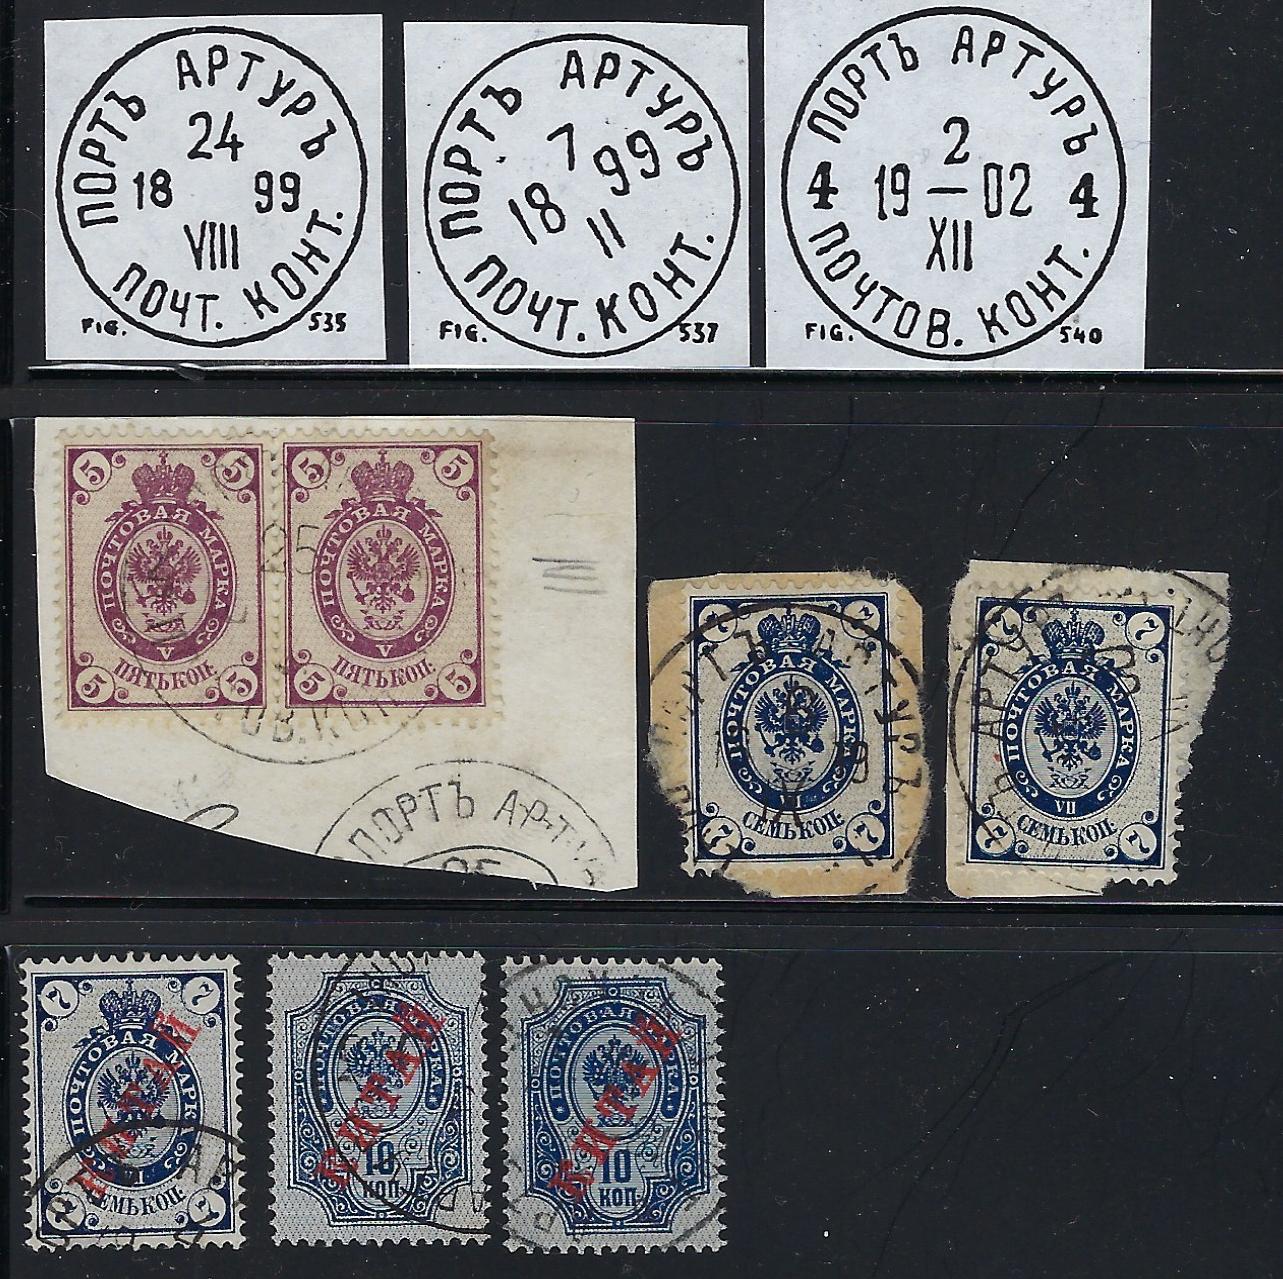 Offices and States - China Stamps of Imperial Russia used in China Scott 0 